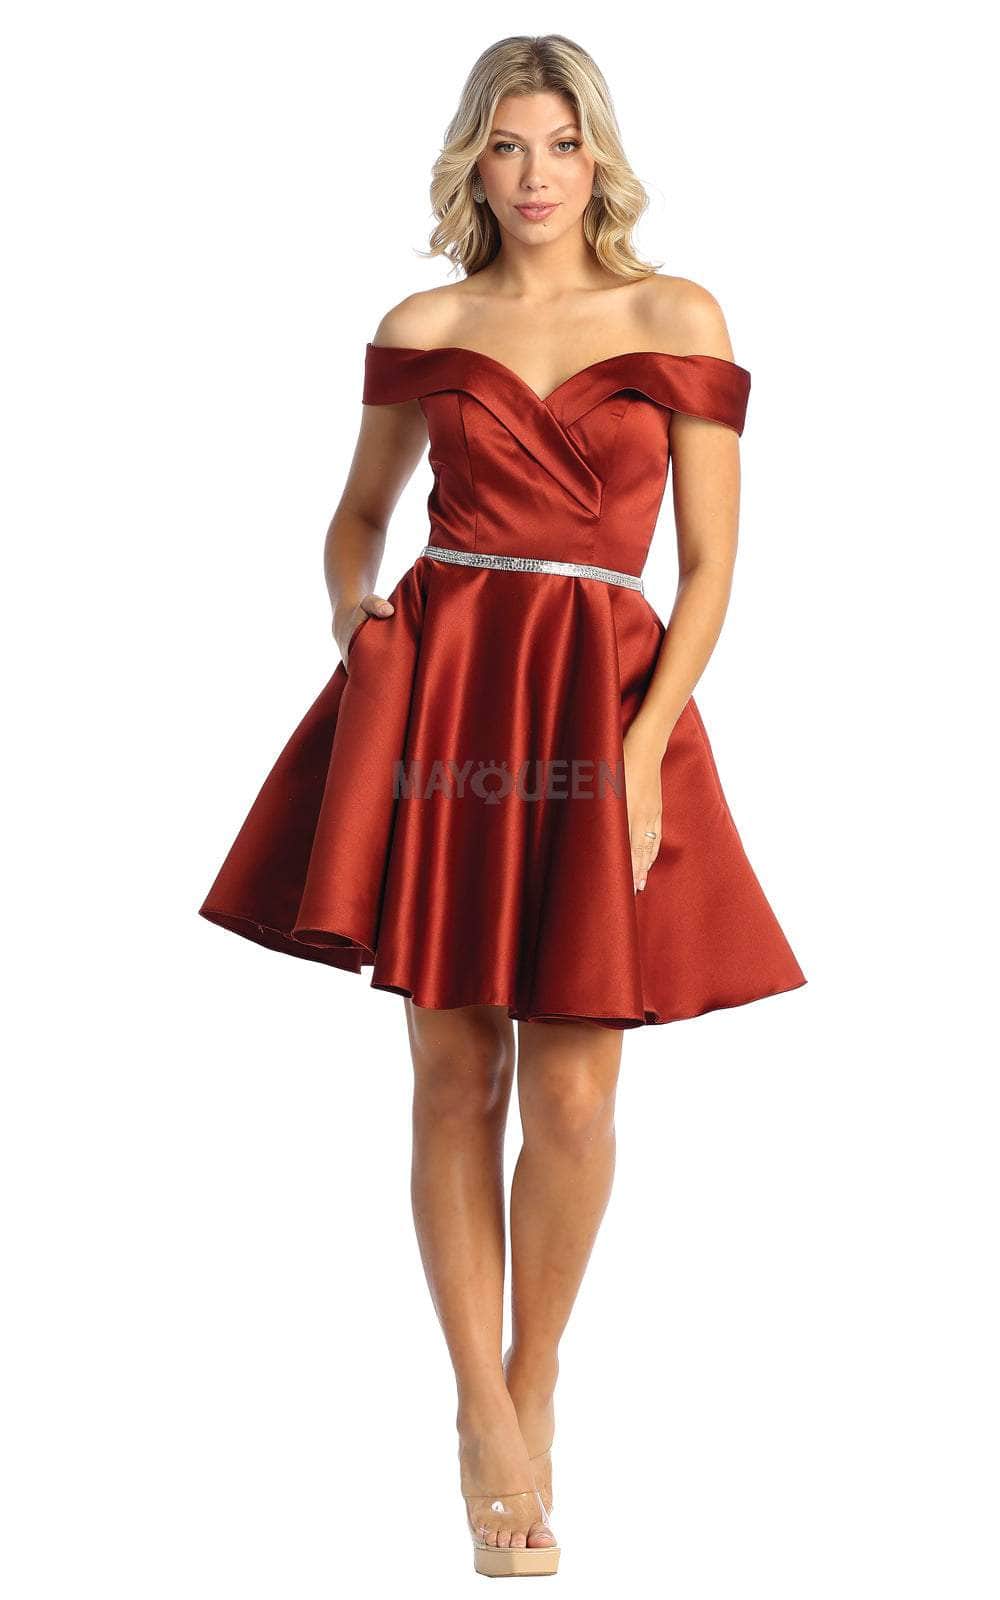 May Queen - MQ1815 Satin A-Line Cocktail Dress
